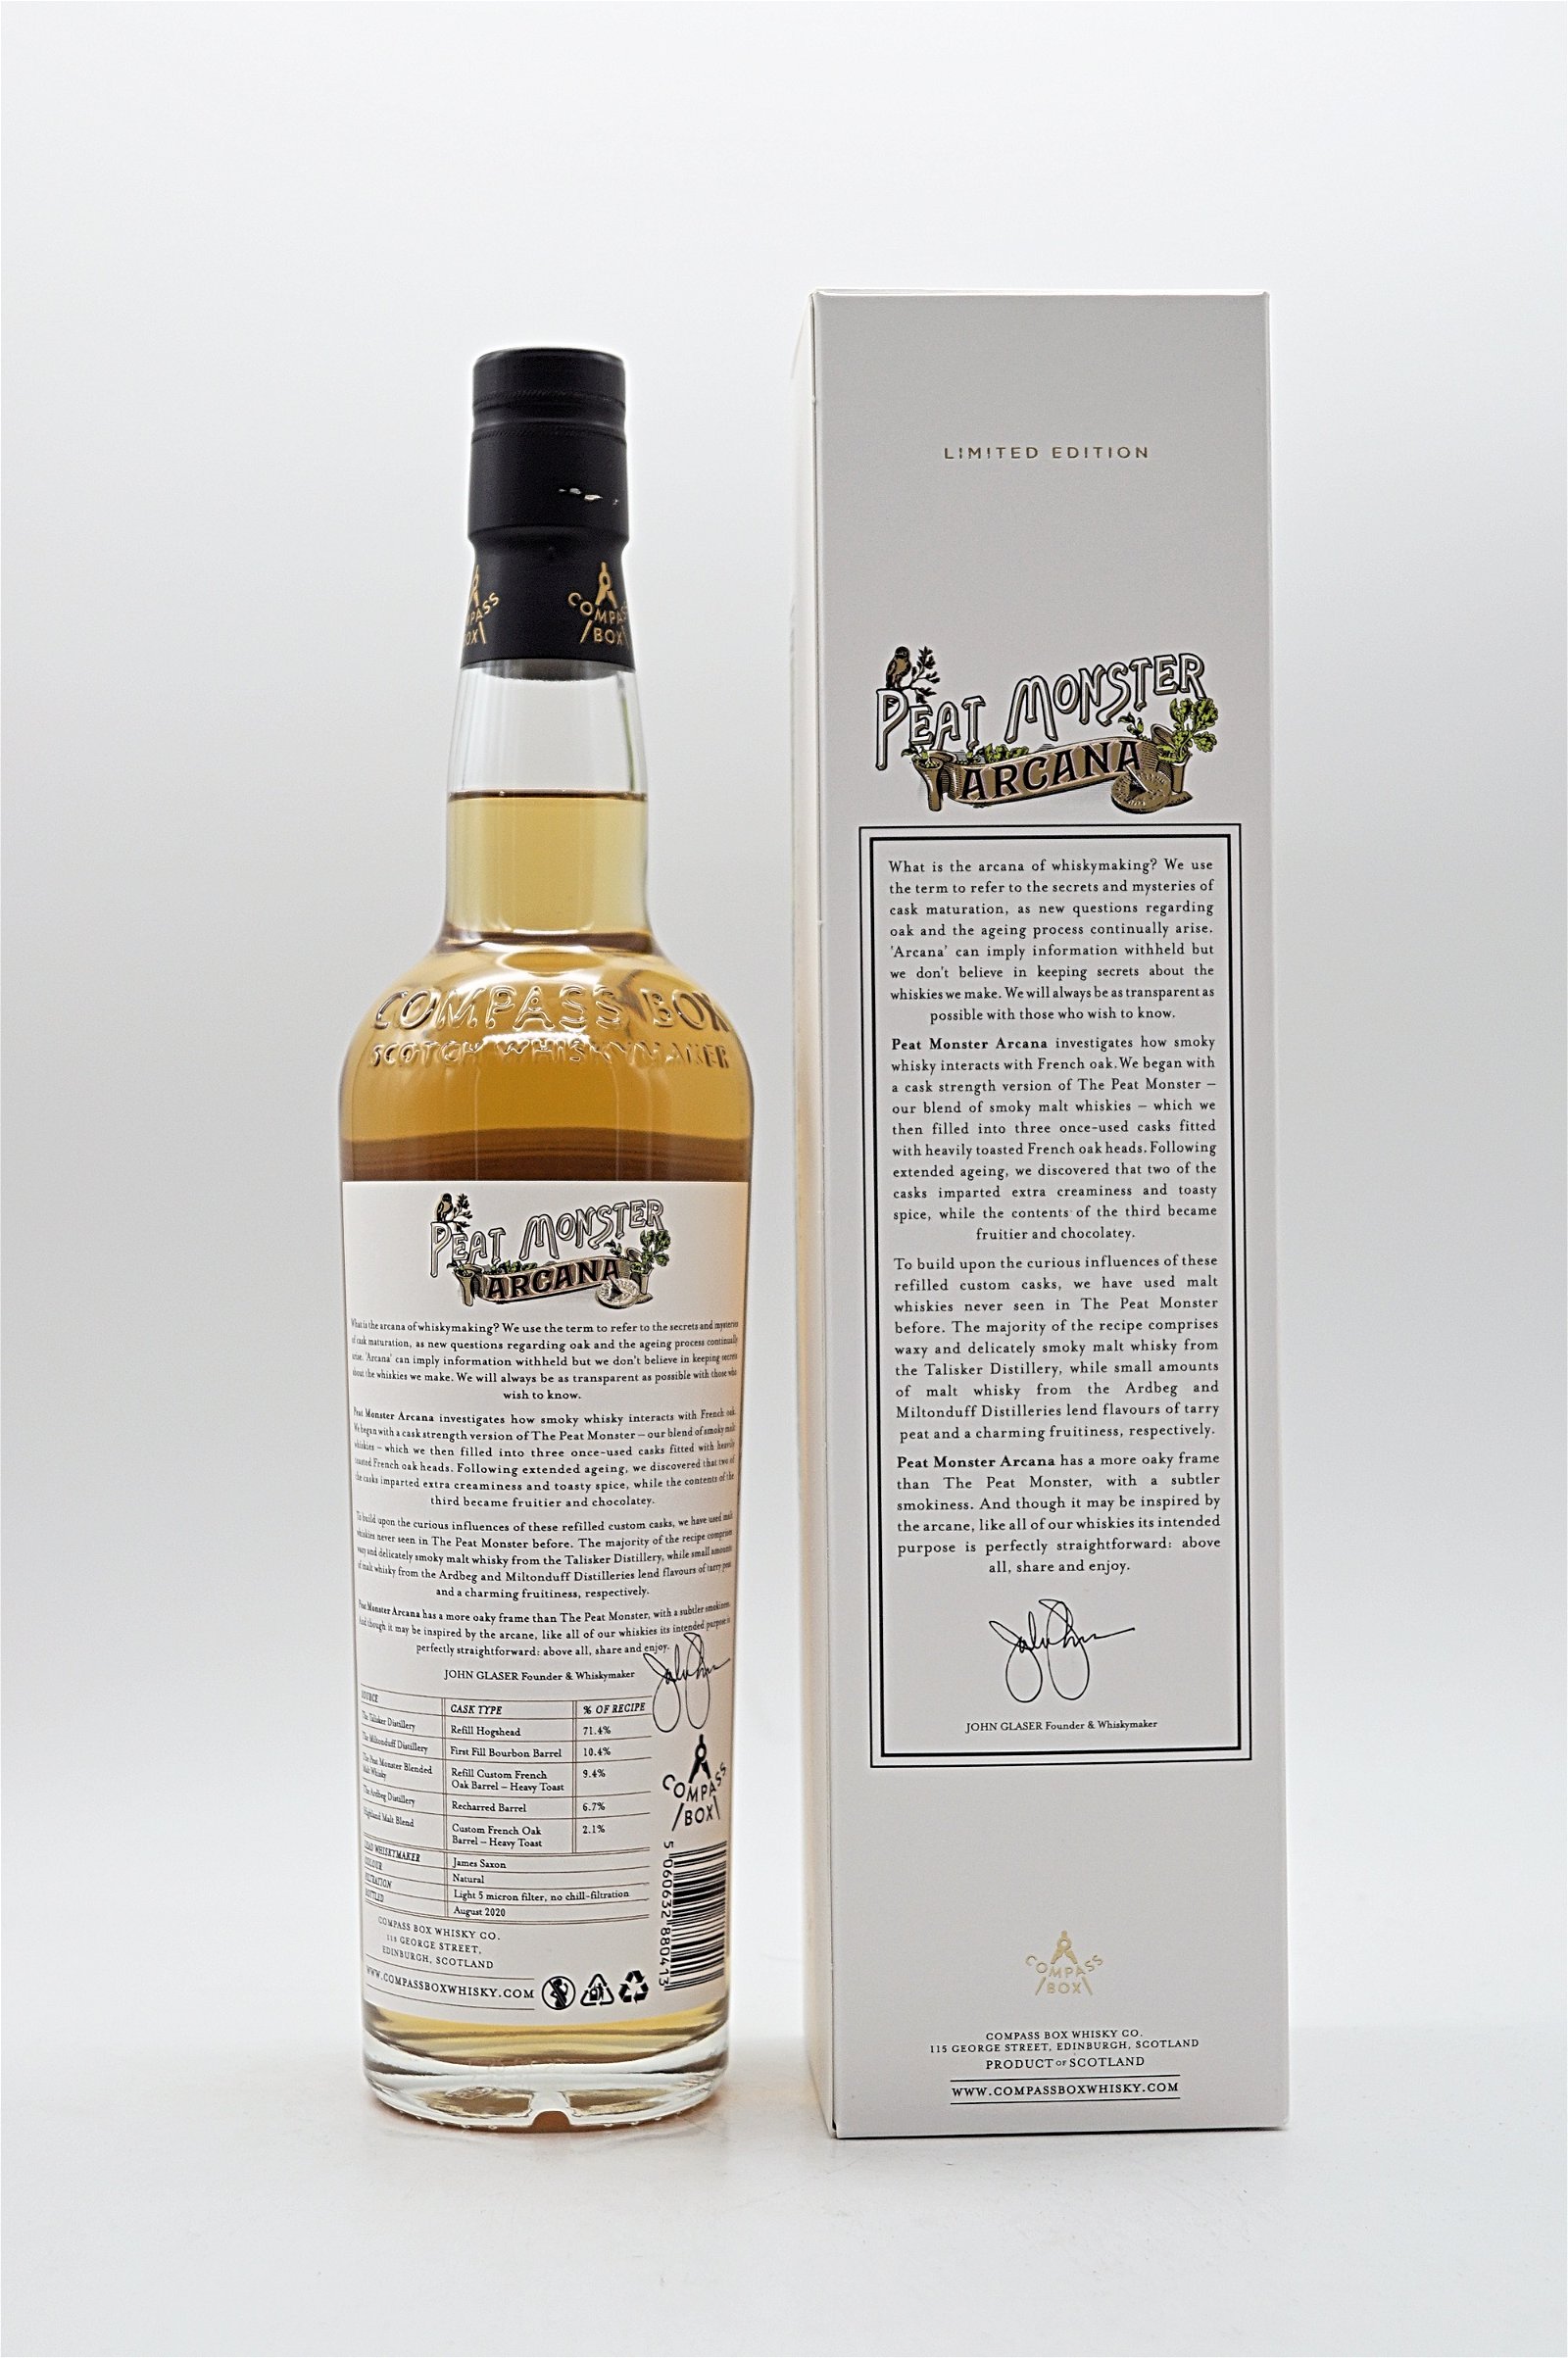 Compass Box The Peat Monster Arcana Limited Edition Blended Malt Scotch Whisky